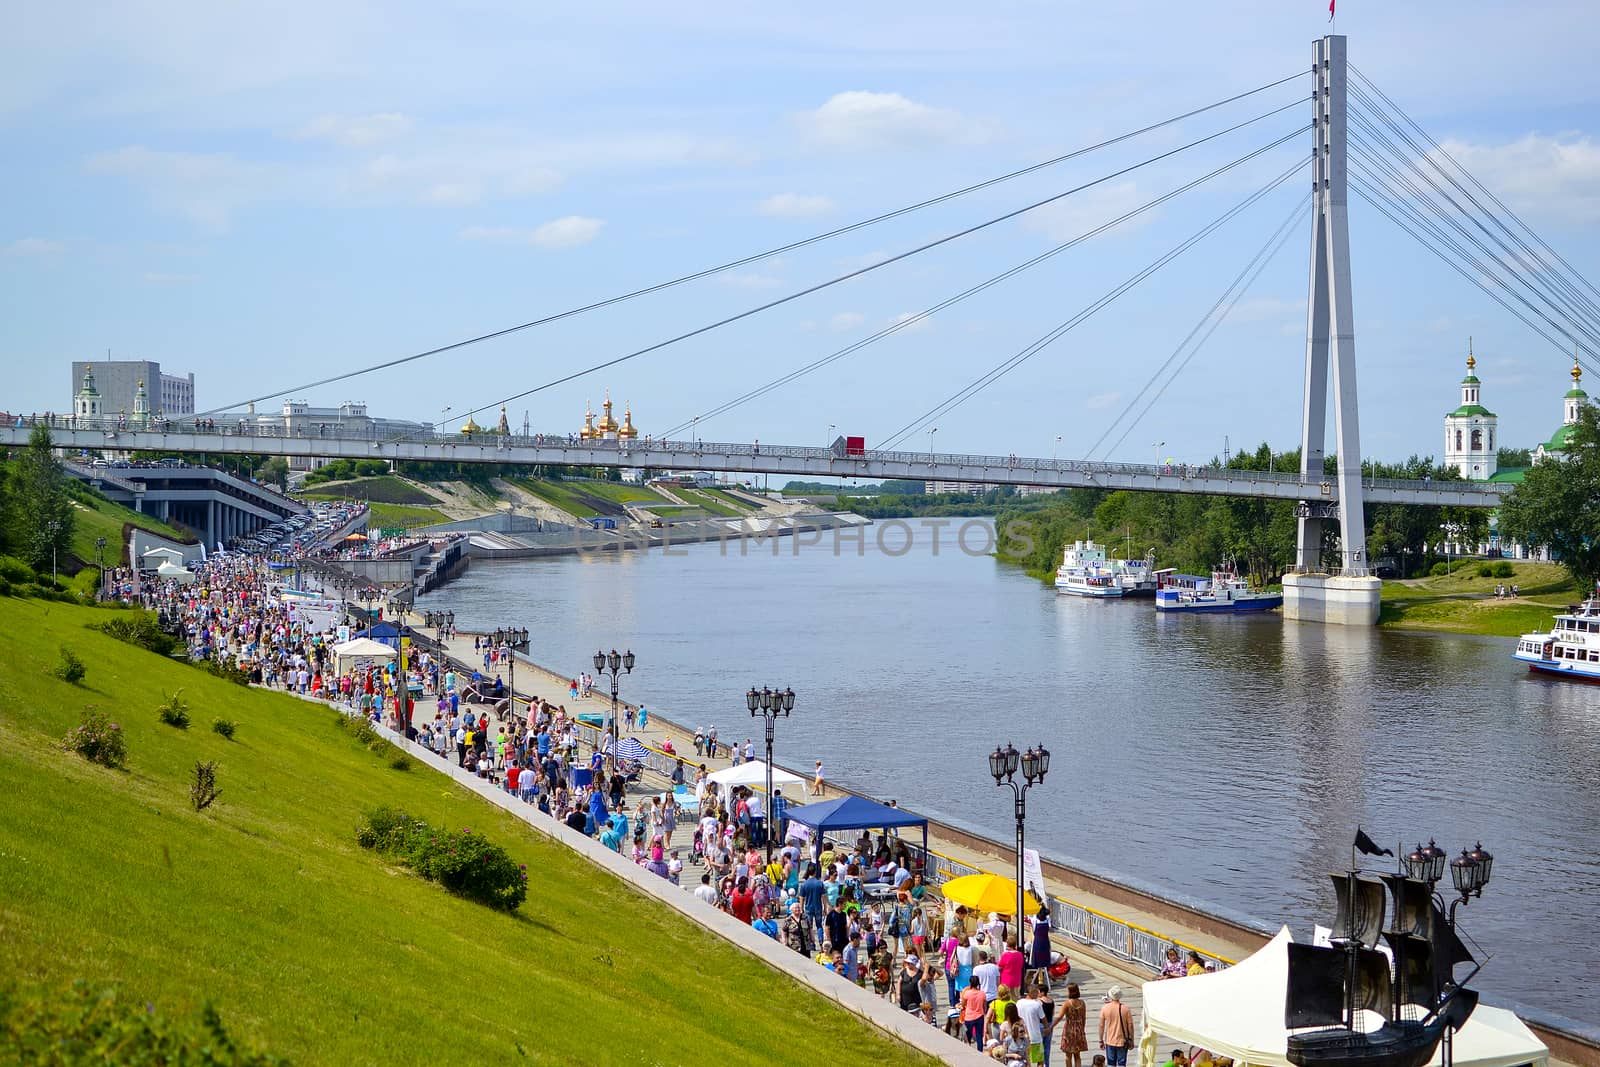 The embankment in Tyumen and the cable-stayed foot bridge. June, by veronka72